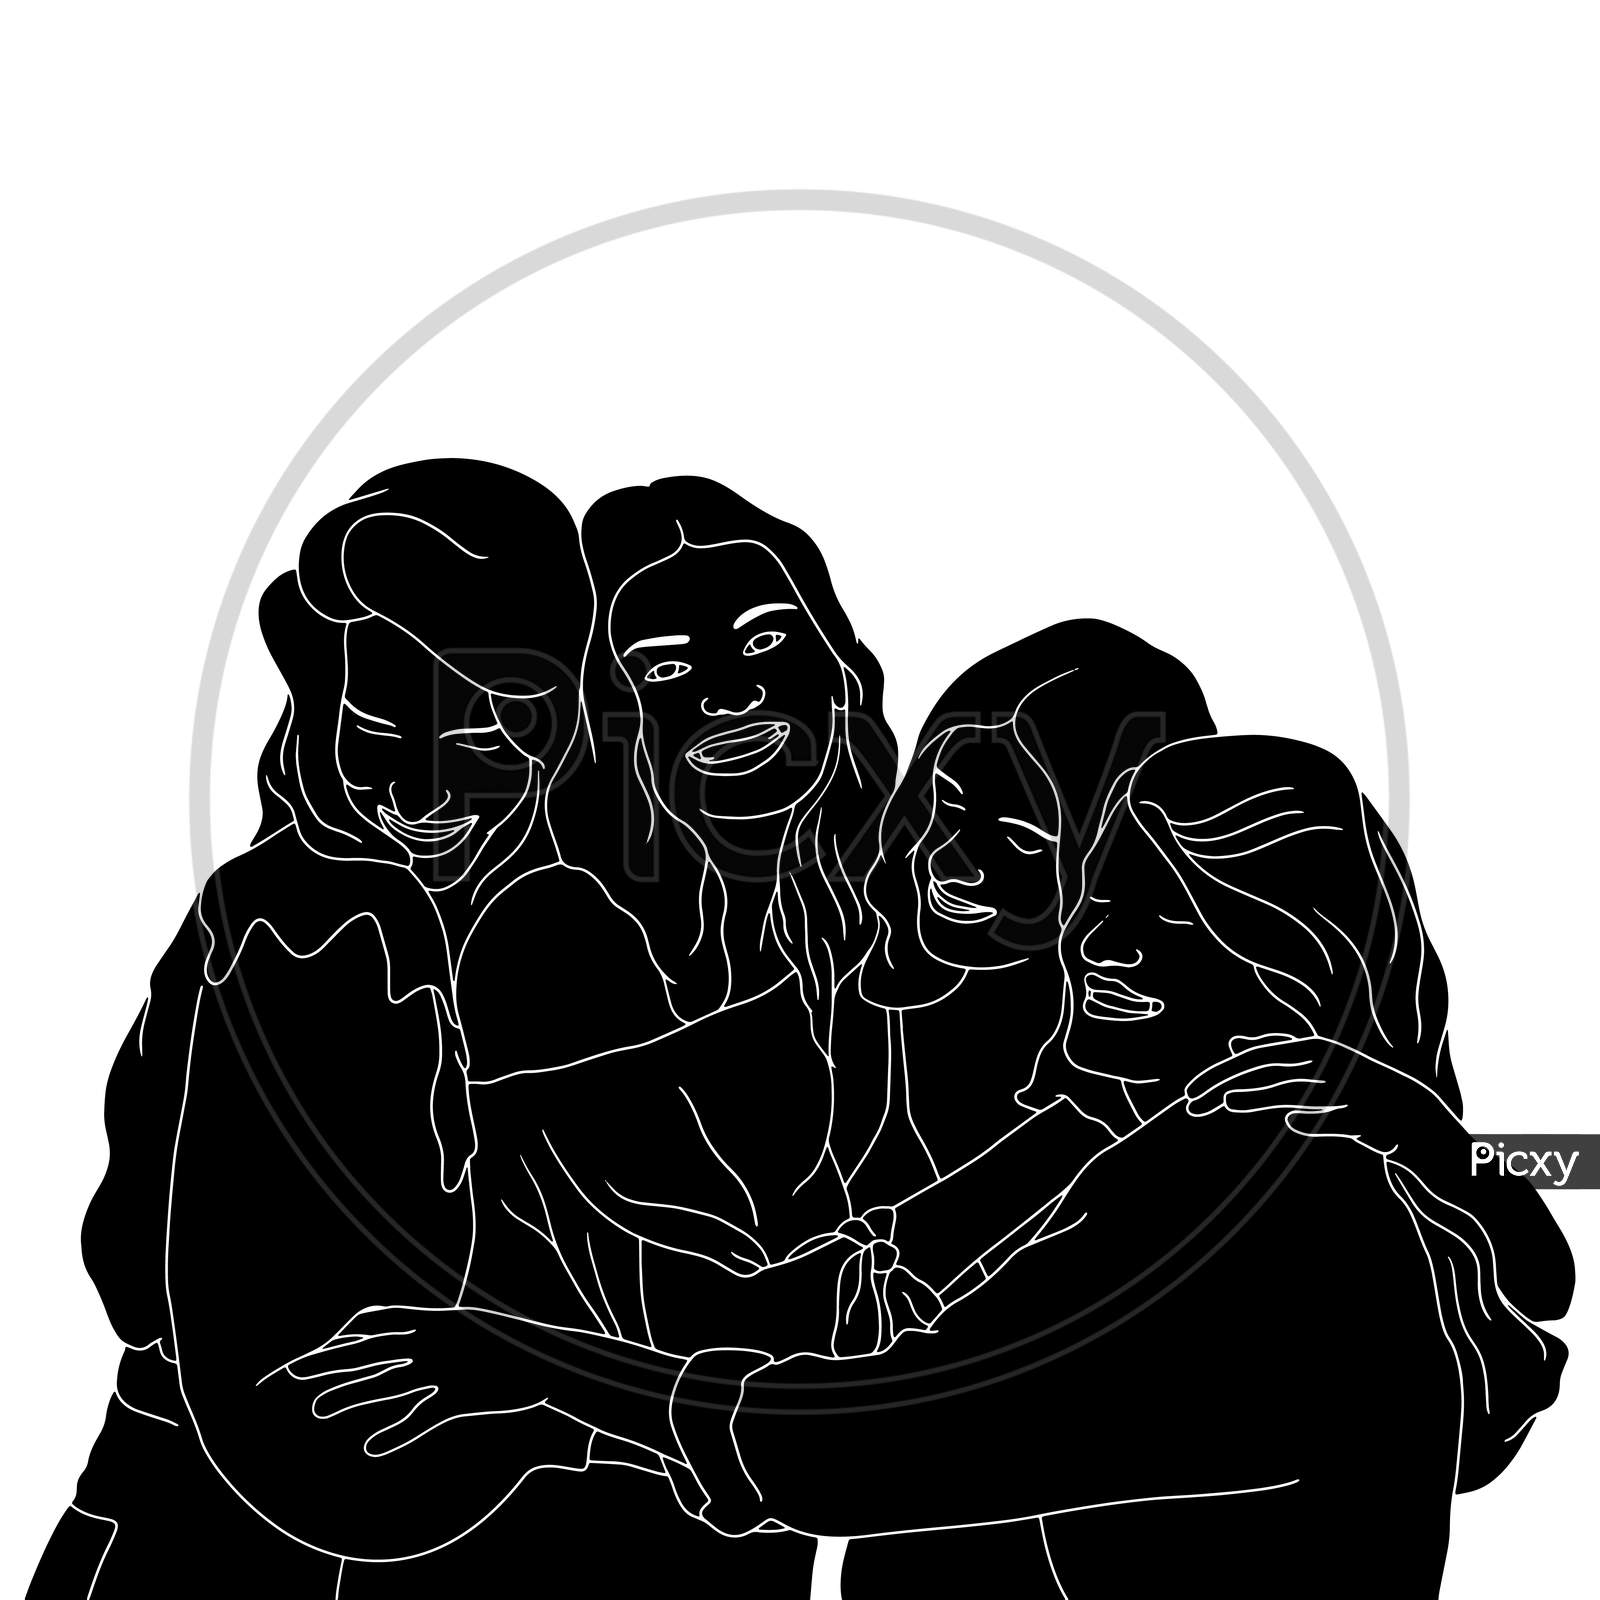 Group Of Girls Having The Best Time, Friendship Happy Moment, The Silhouette Of People For Friendship Day. Hand-Drawn Character Illustration Of Happy People.